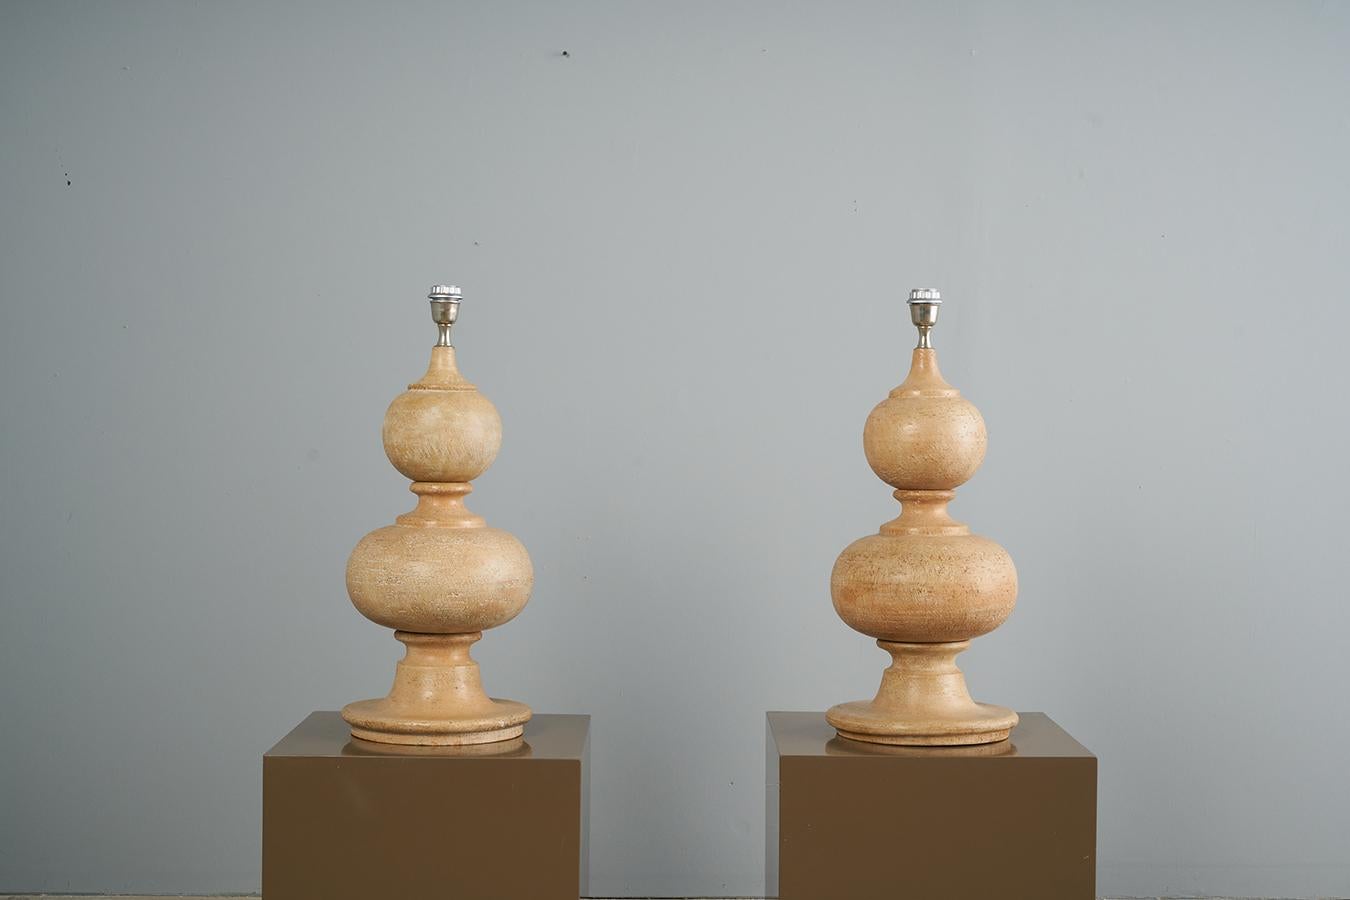 20th Century Monumental Pair of Earthenware Italian Ceramic Lamps by Ugo Zaccagnini  For Sale